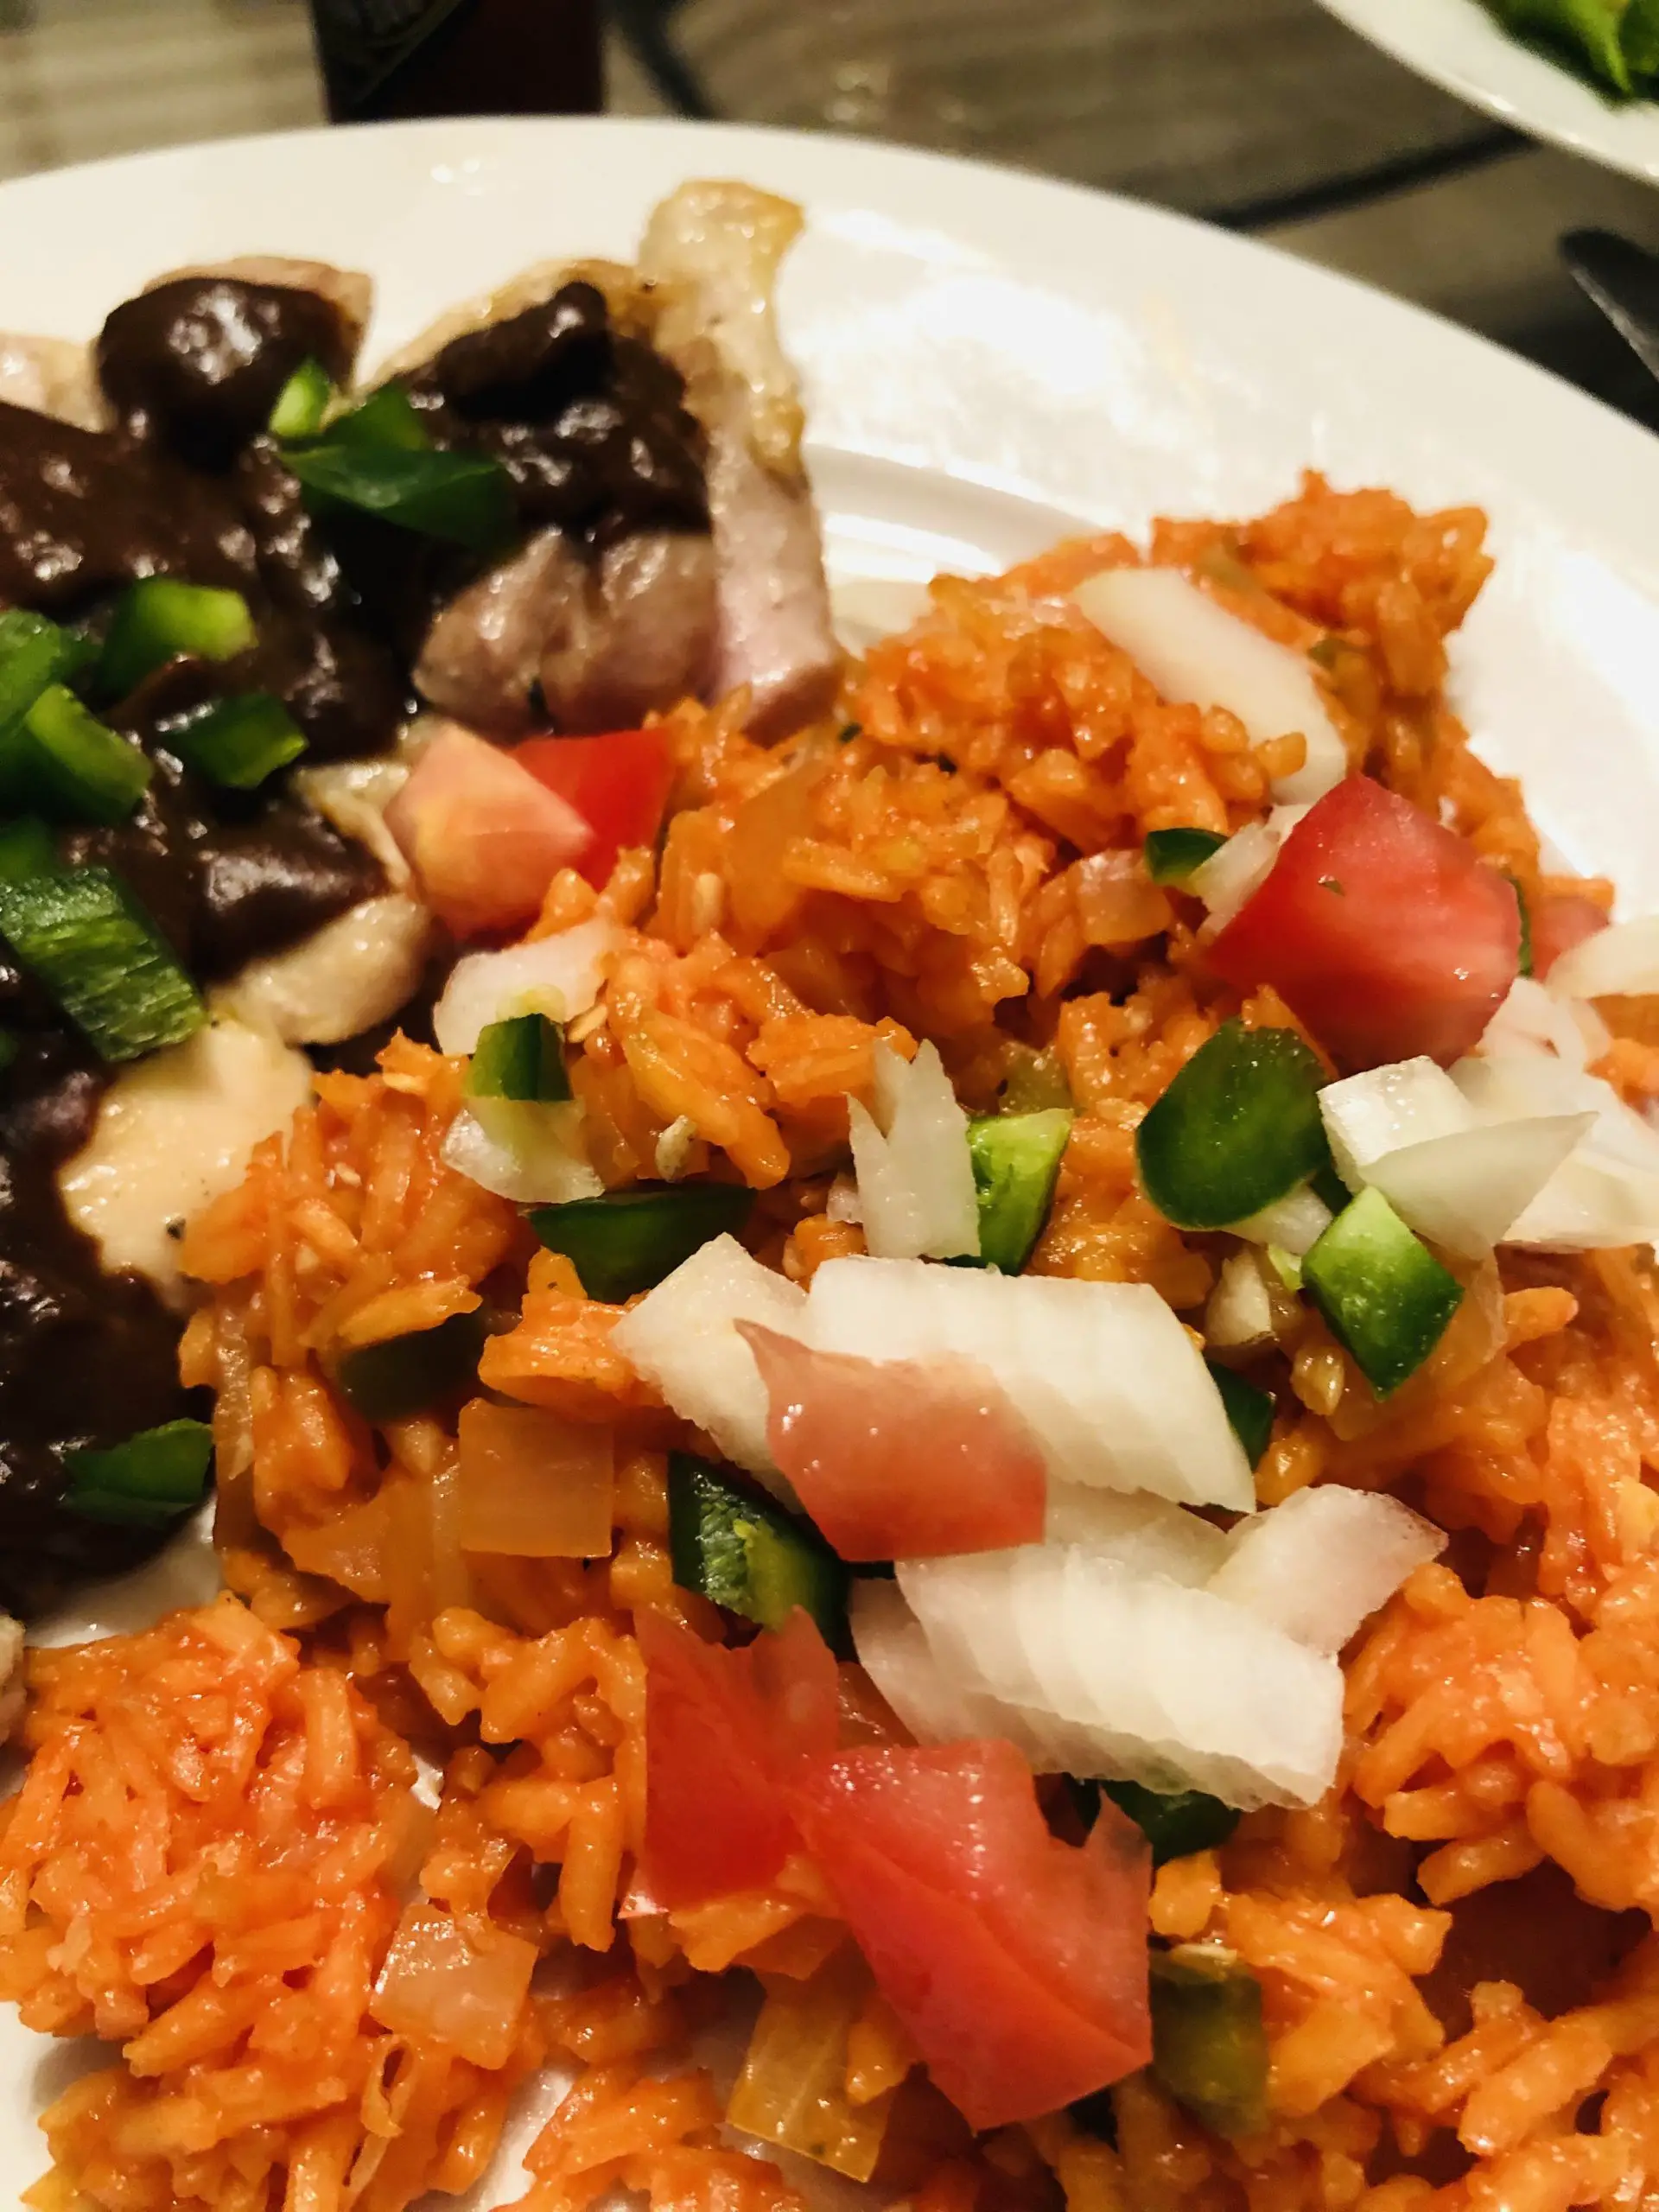 Mexican Rice served with chicken mole on a white plate garnished with onions, tomatoes, and jalapenos